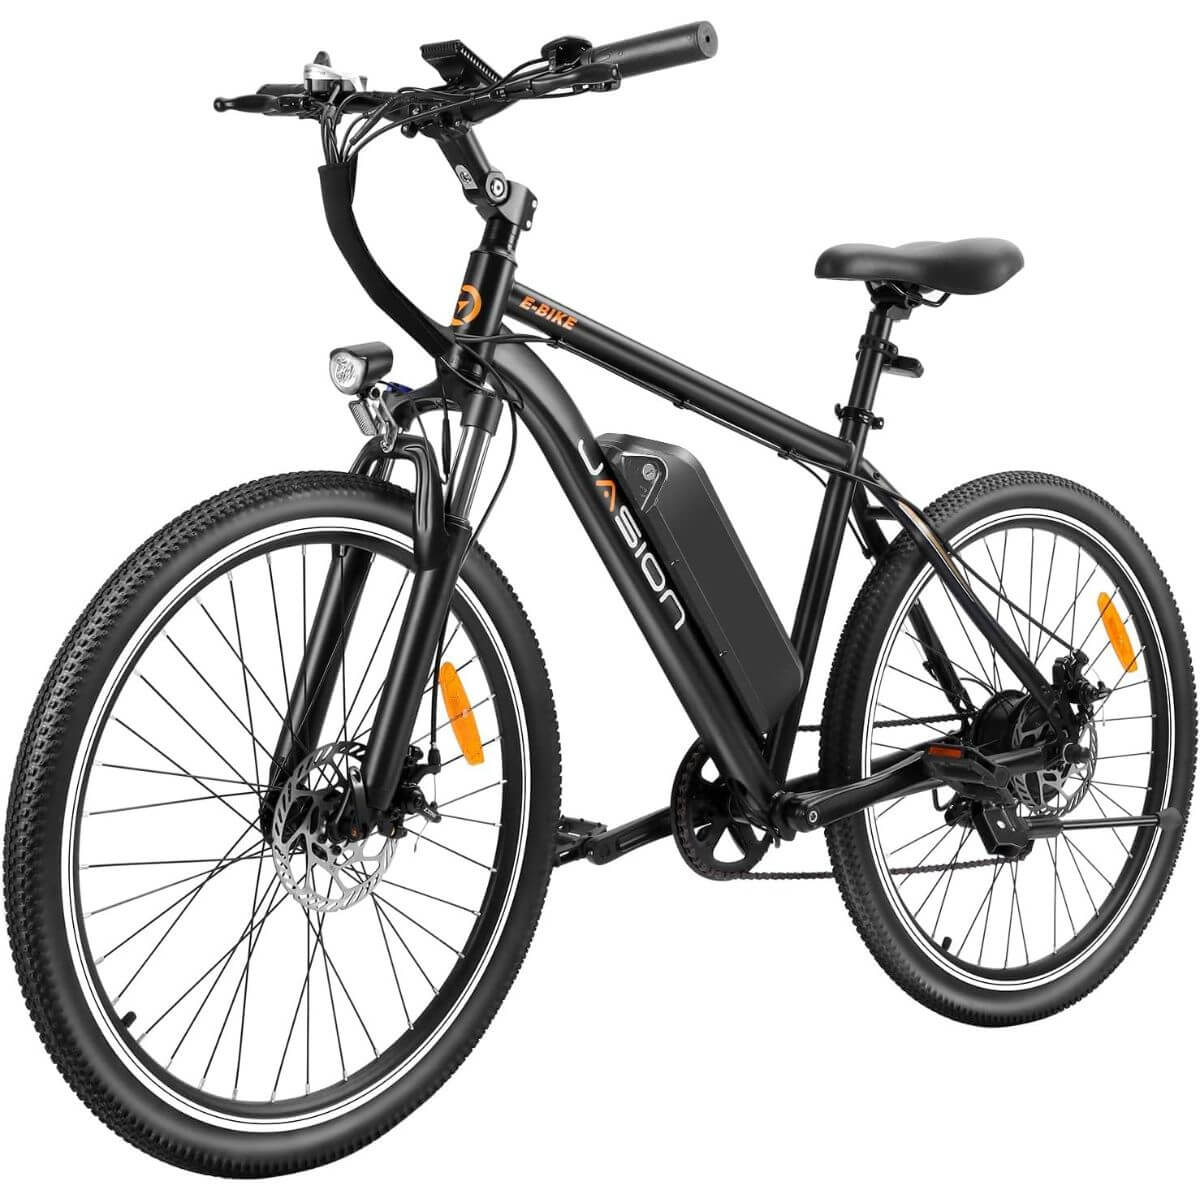 Photo of a black Jasion EB5 ebike for adults.